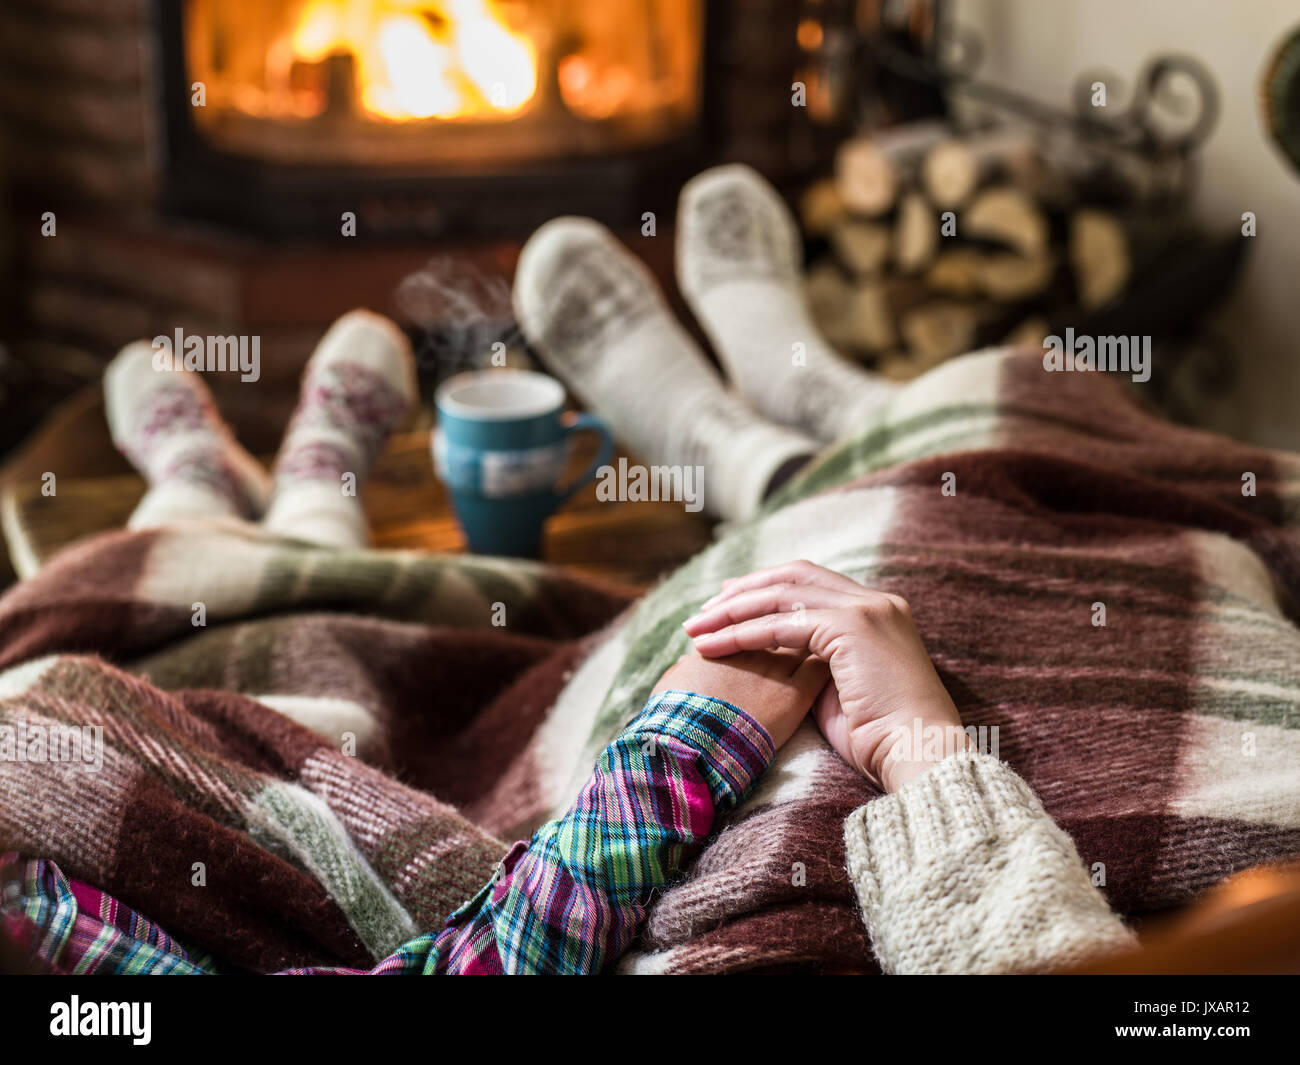 Warming and relaxing near fireplace. Mother and daughter holding hands in front of fire. Stock Photo